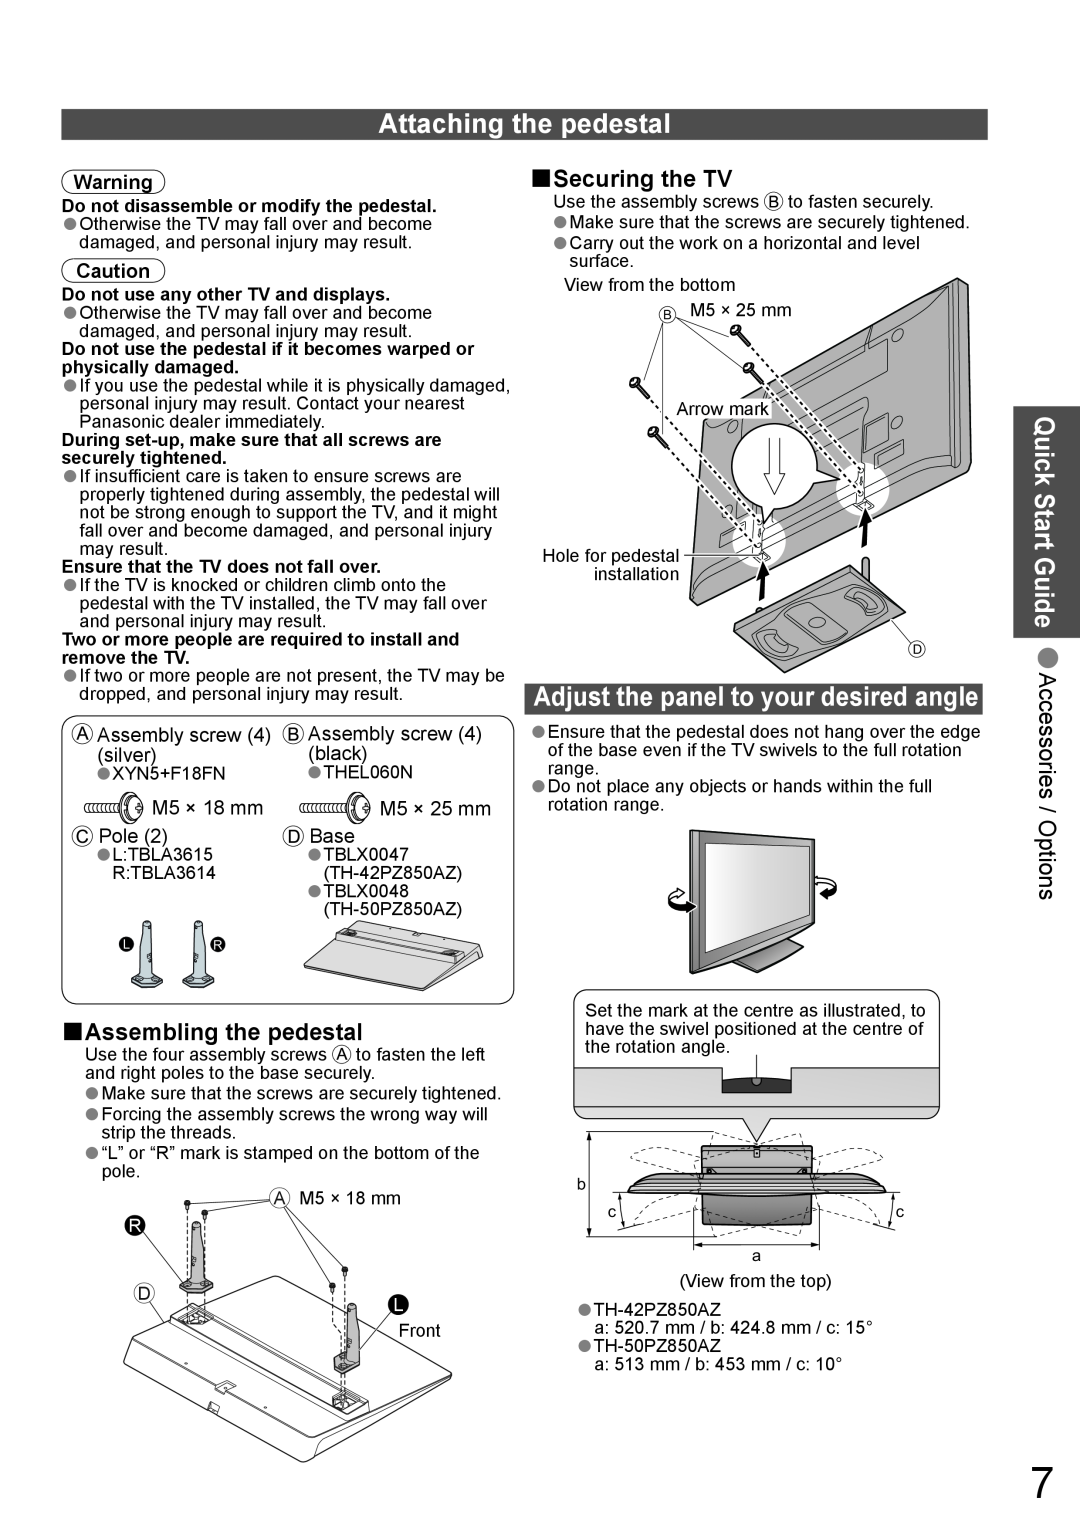 Panasonic TH-42PZ850AZ Attaching the pedestal, Securing the TV, Quick Start Guide Accessories / Options, Assembly screw 